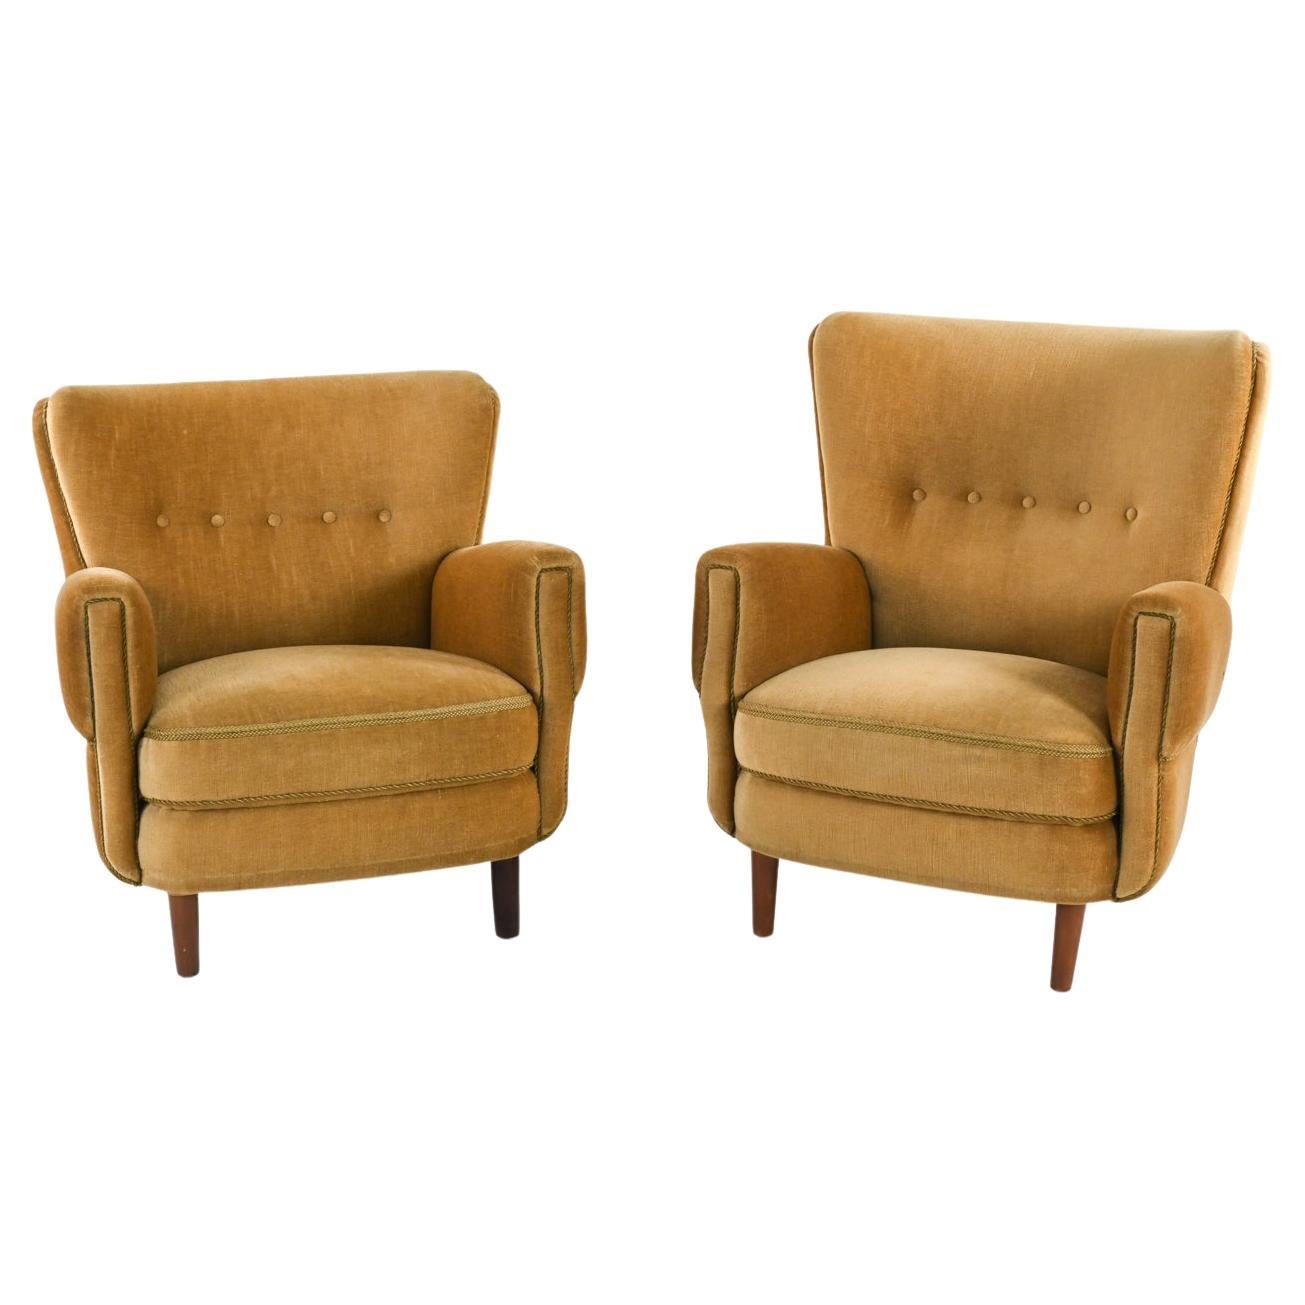 Danish Mohair His & Hers Easy Chairs Attributed to Fritz Hansen, c. 1950's